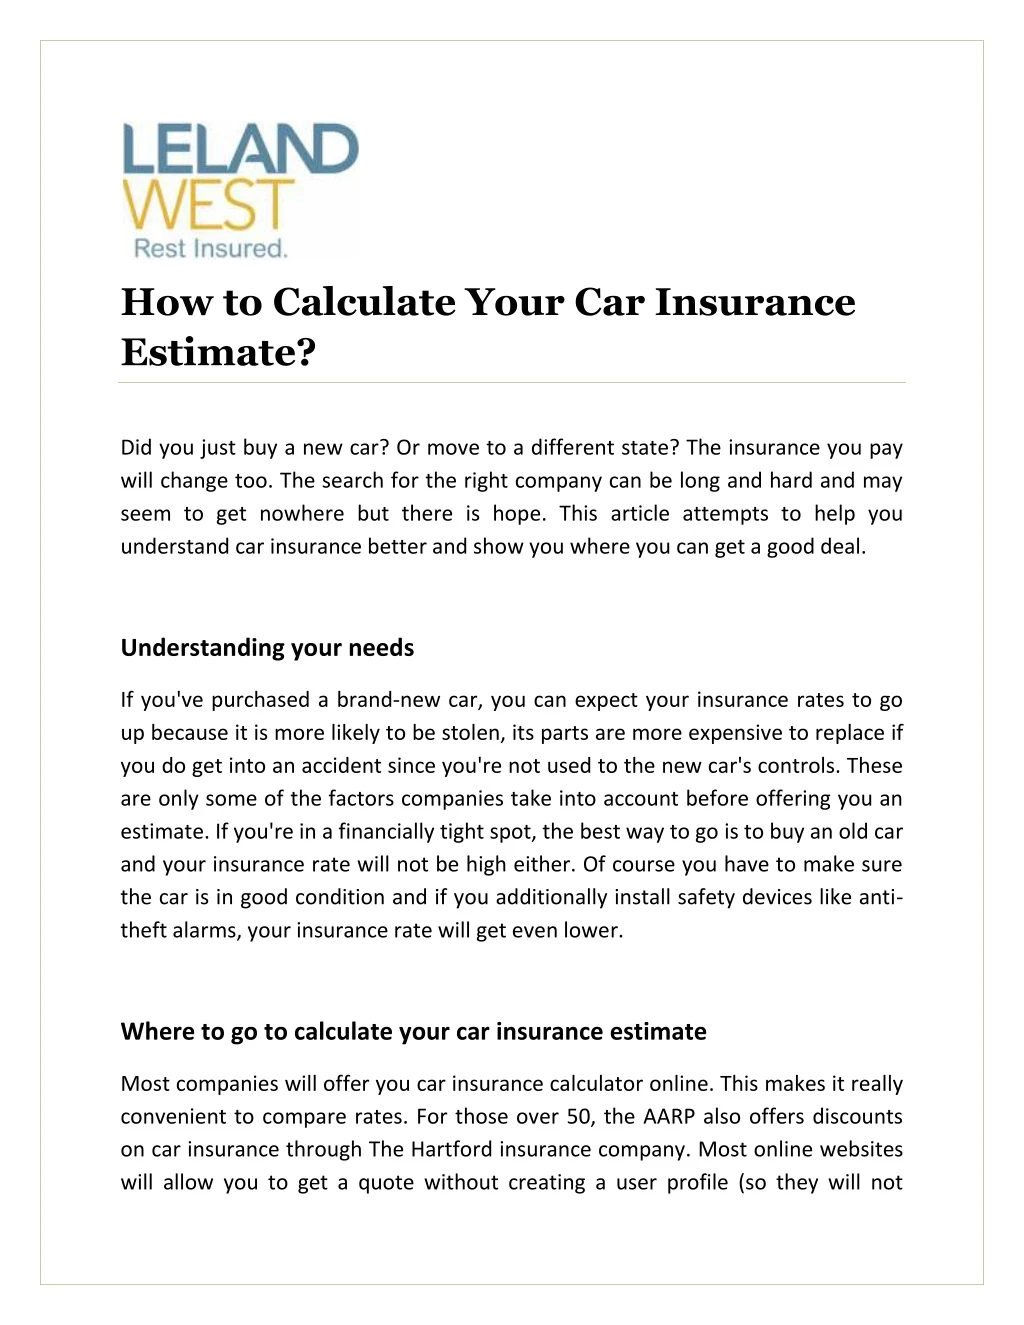 how to calculate your car insurance estimate